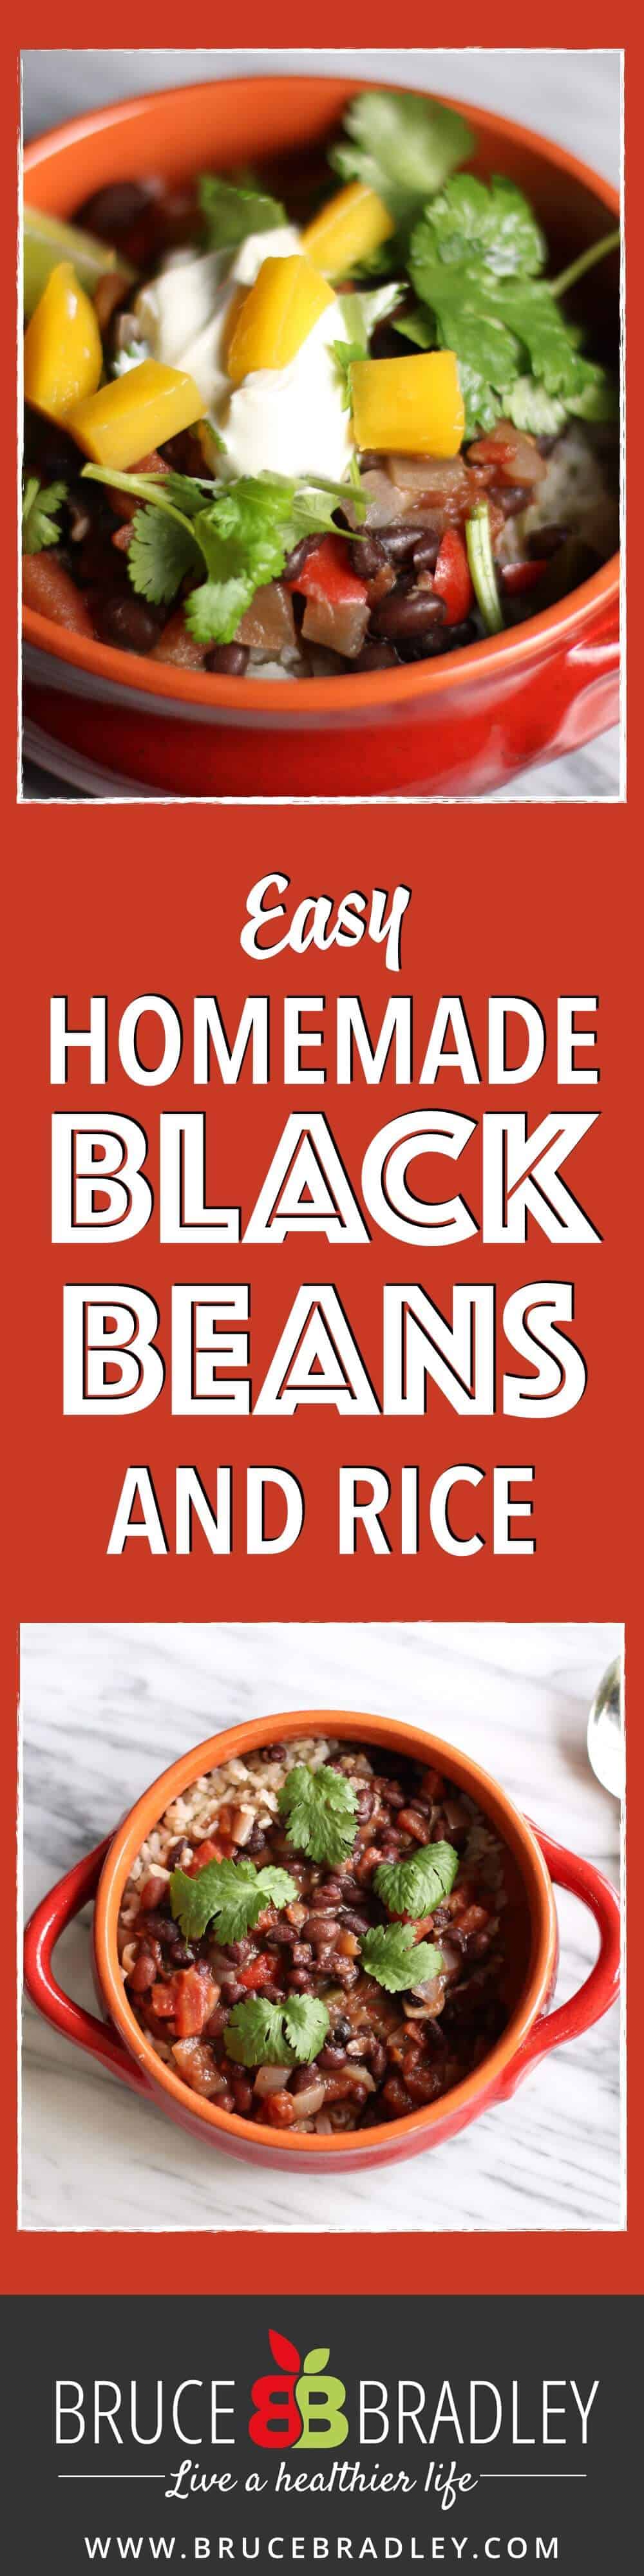 Inspired By The Cuban Black Beans And Rice I Grew Up With, This Easy, Homemade Original Will Become A Family Favorite!